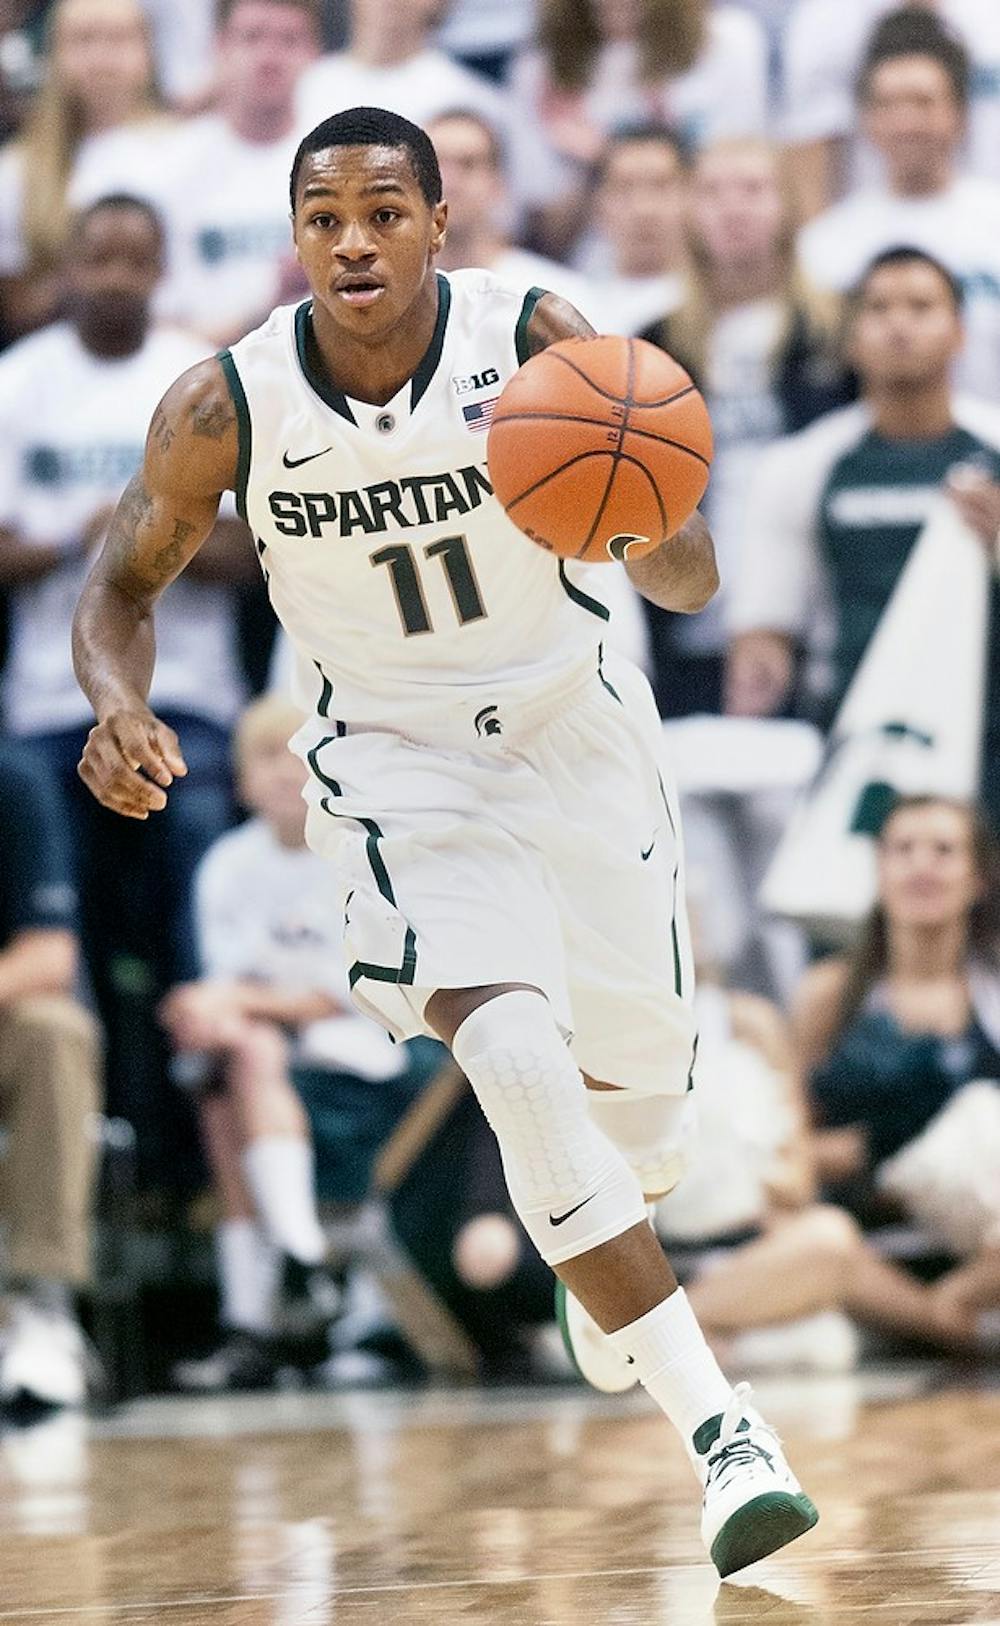 	<p>Junior guard Keith Appling dribbles the ball down the court Nov. 2 at Breslin Center. In the second regular season game of the year, Appling rallied the Spartans with a game-high 19 points to upset No. 7 Kansas in the Champions Classic in Atlanta. Adam Toolin/The State News</p>